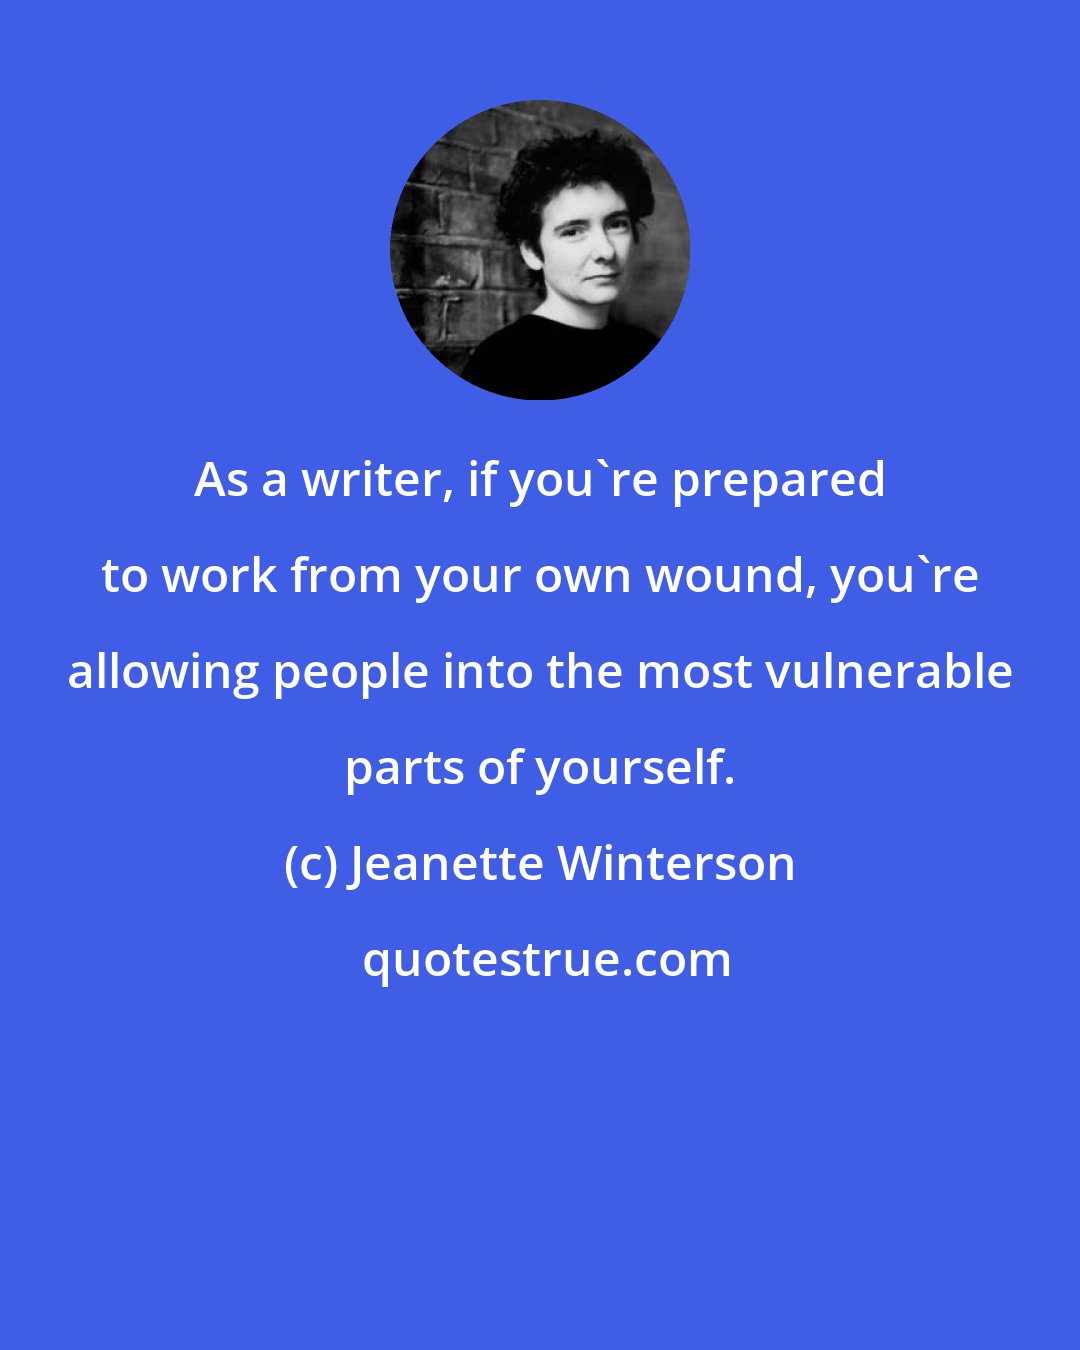 Jeanette Winterson: As a writer, if you're prepared to work from your own wound, you're allowing people into the most vulnerable parts of yourself.